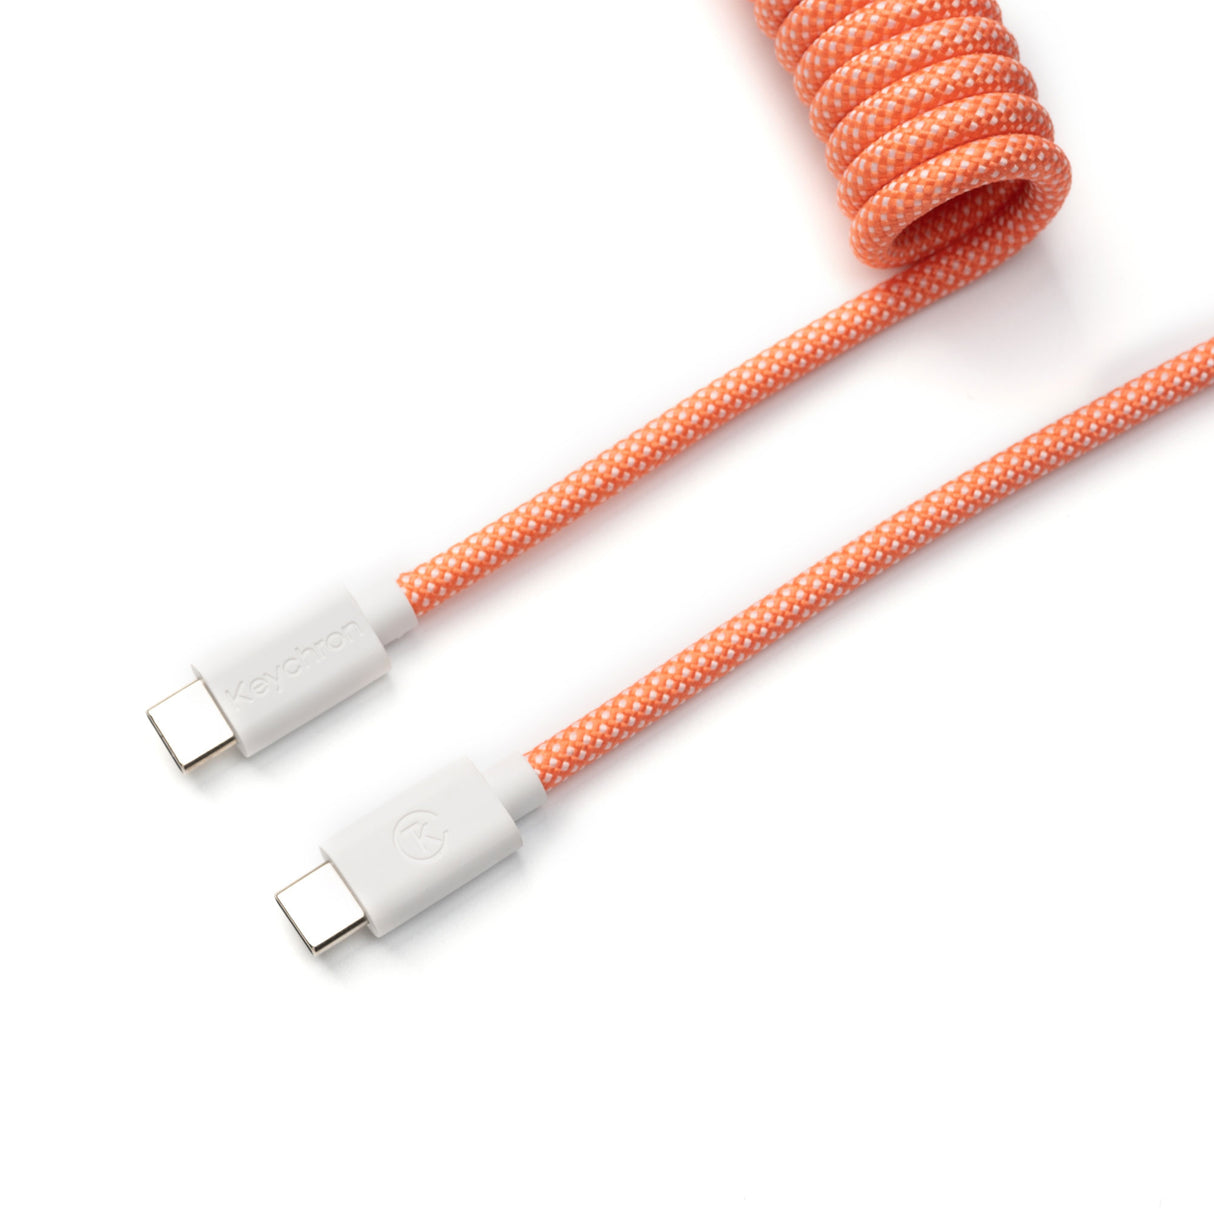 Glorious Coiled Keyboard Cable – Coiled USB C Cable Artisan Braided Cables  for Mechanical Gaming Keyboard Coiled Cable - Custom Keyboard Cable